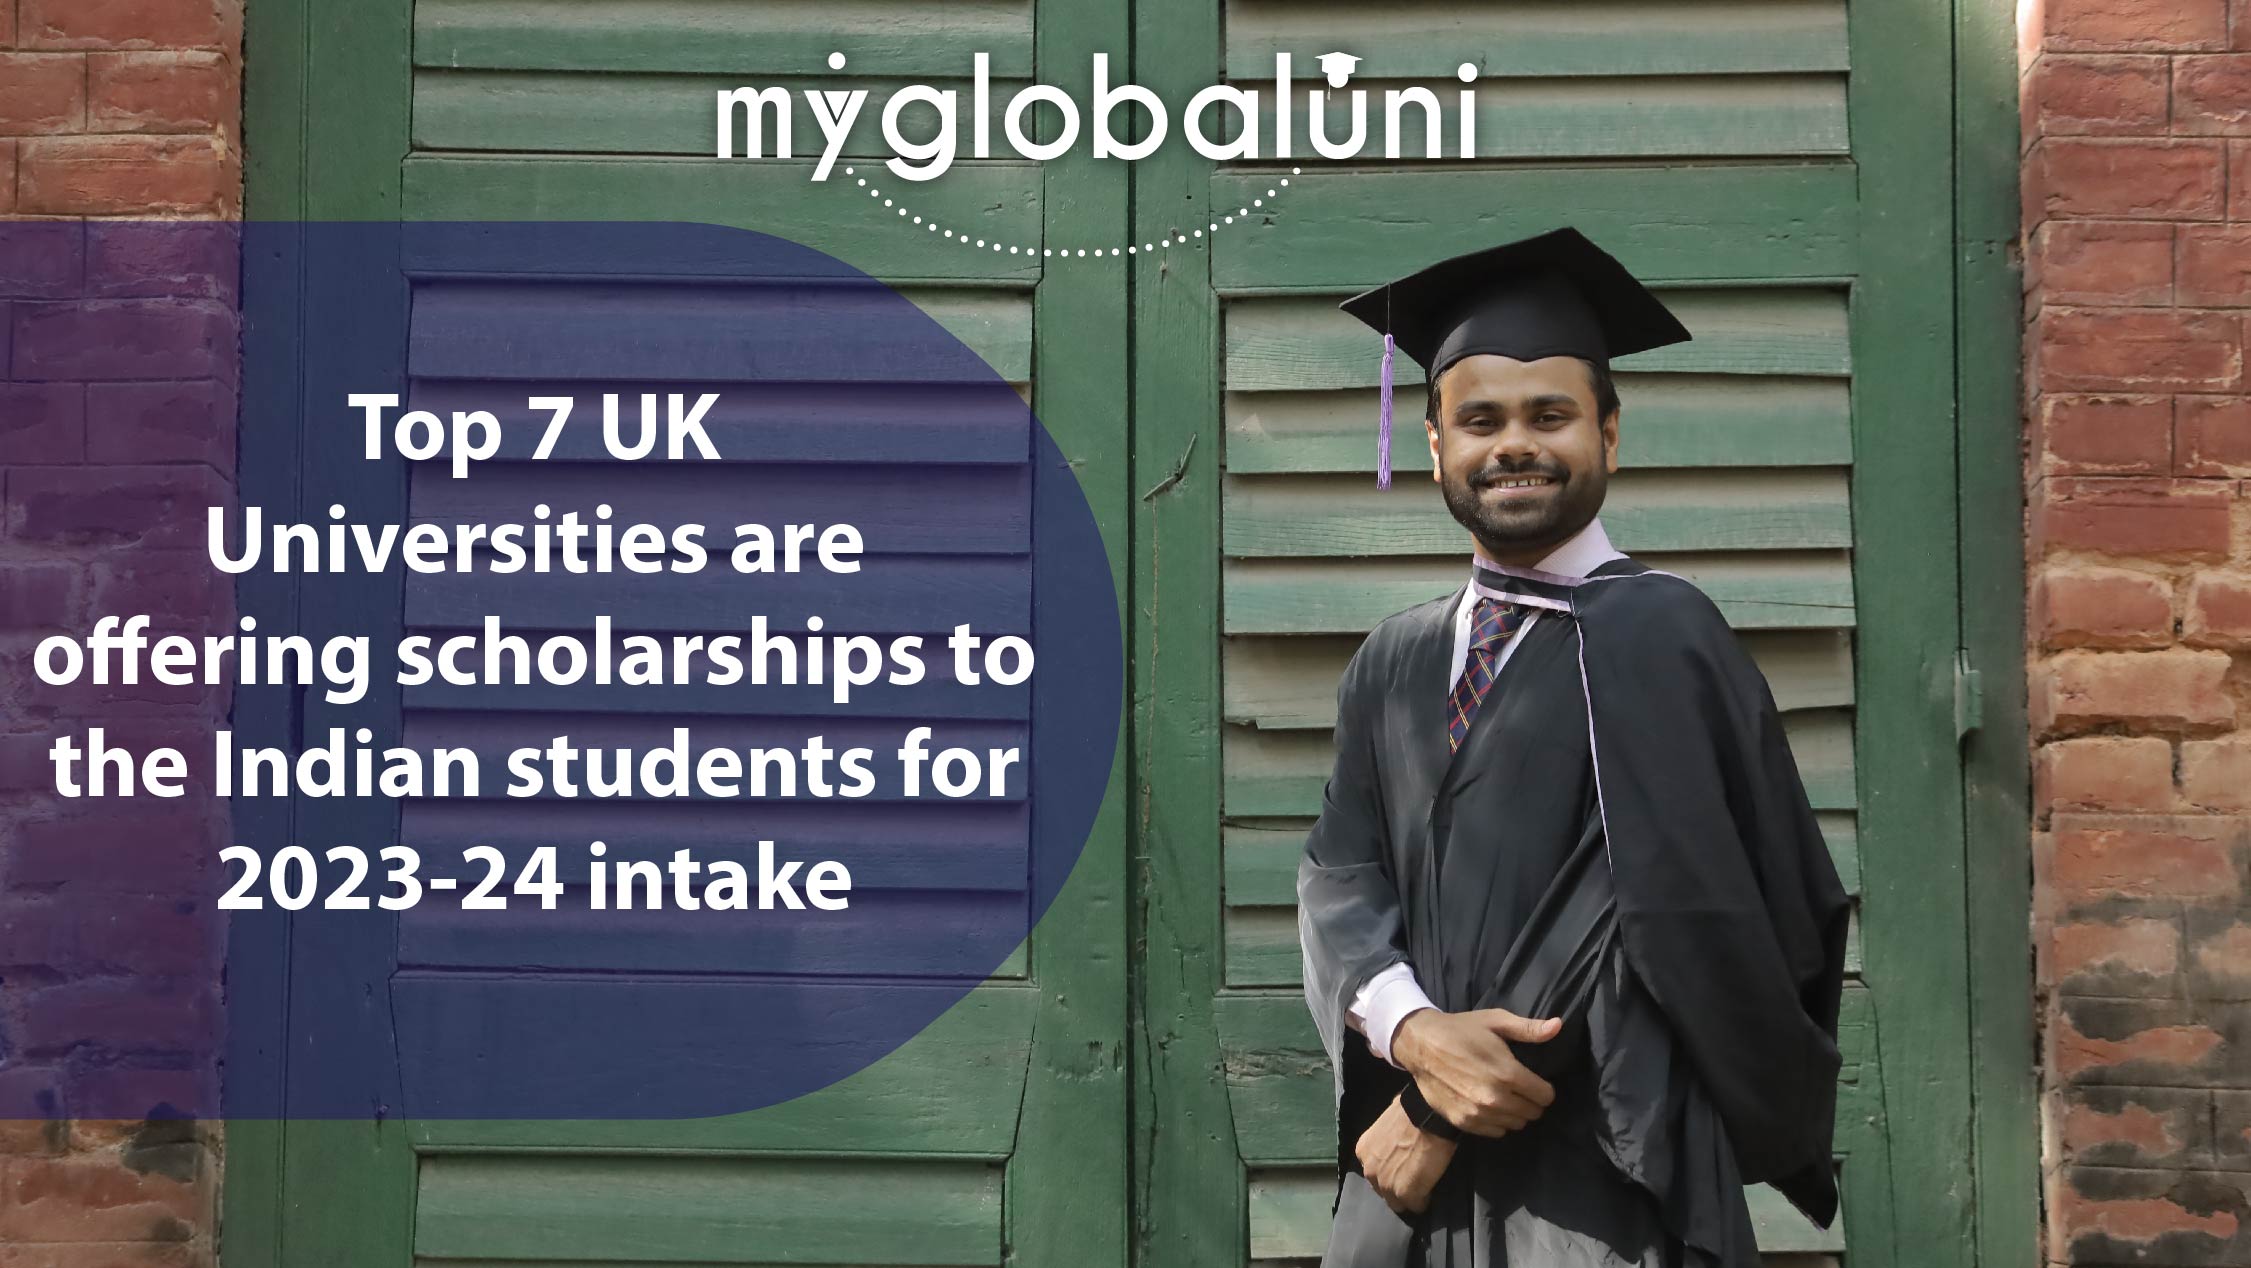 Top 7 UK Universities are offering scholarships to the Indian students for 2023-24 intake